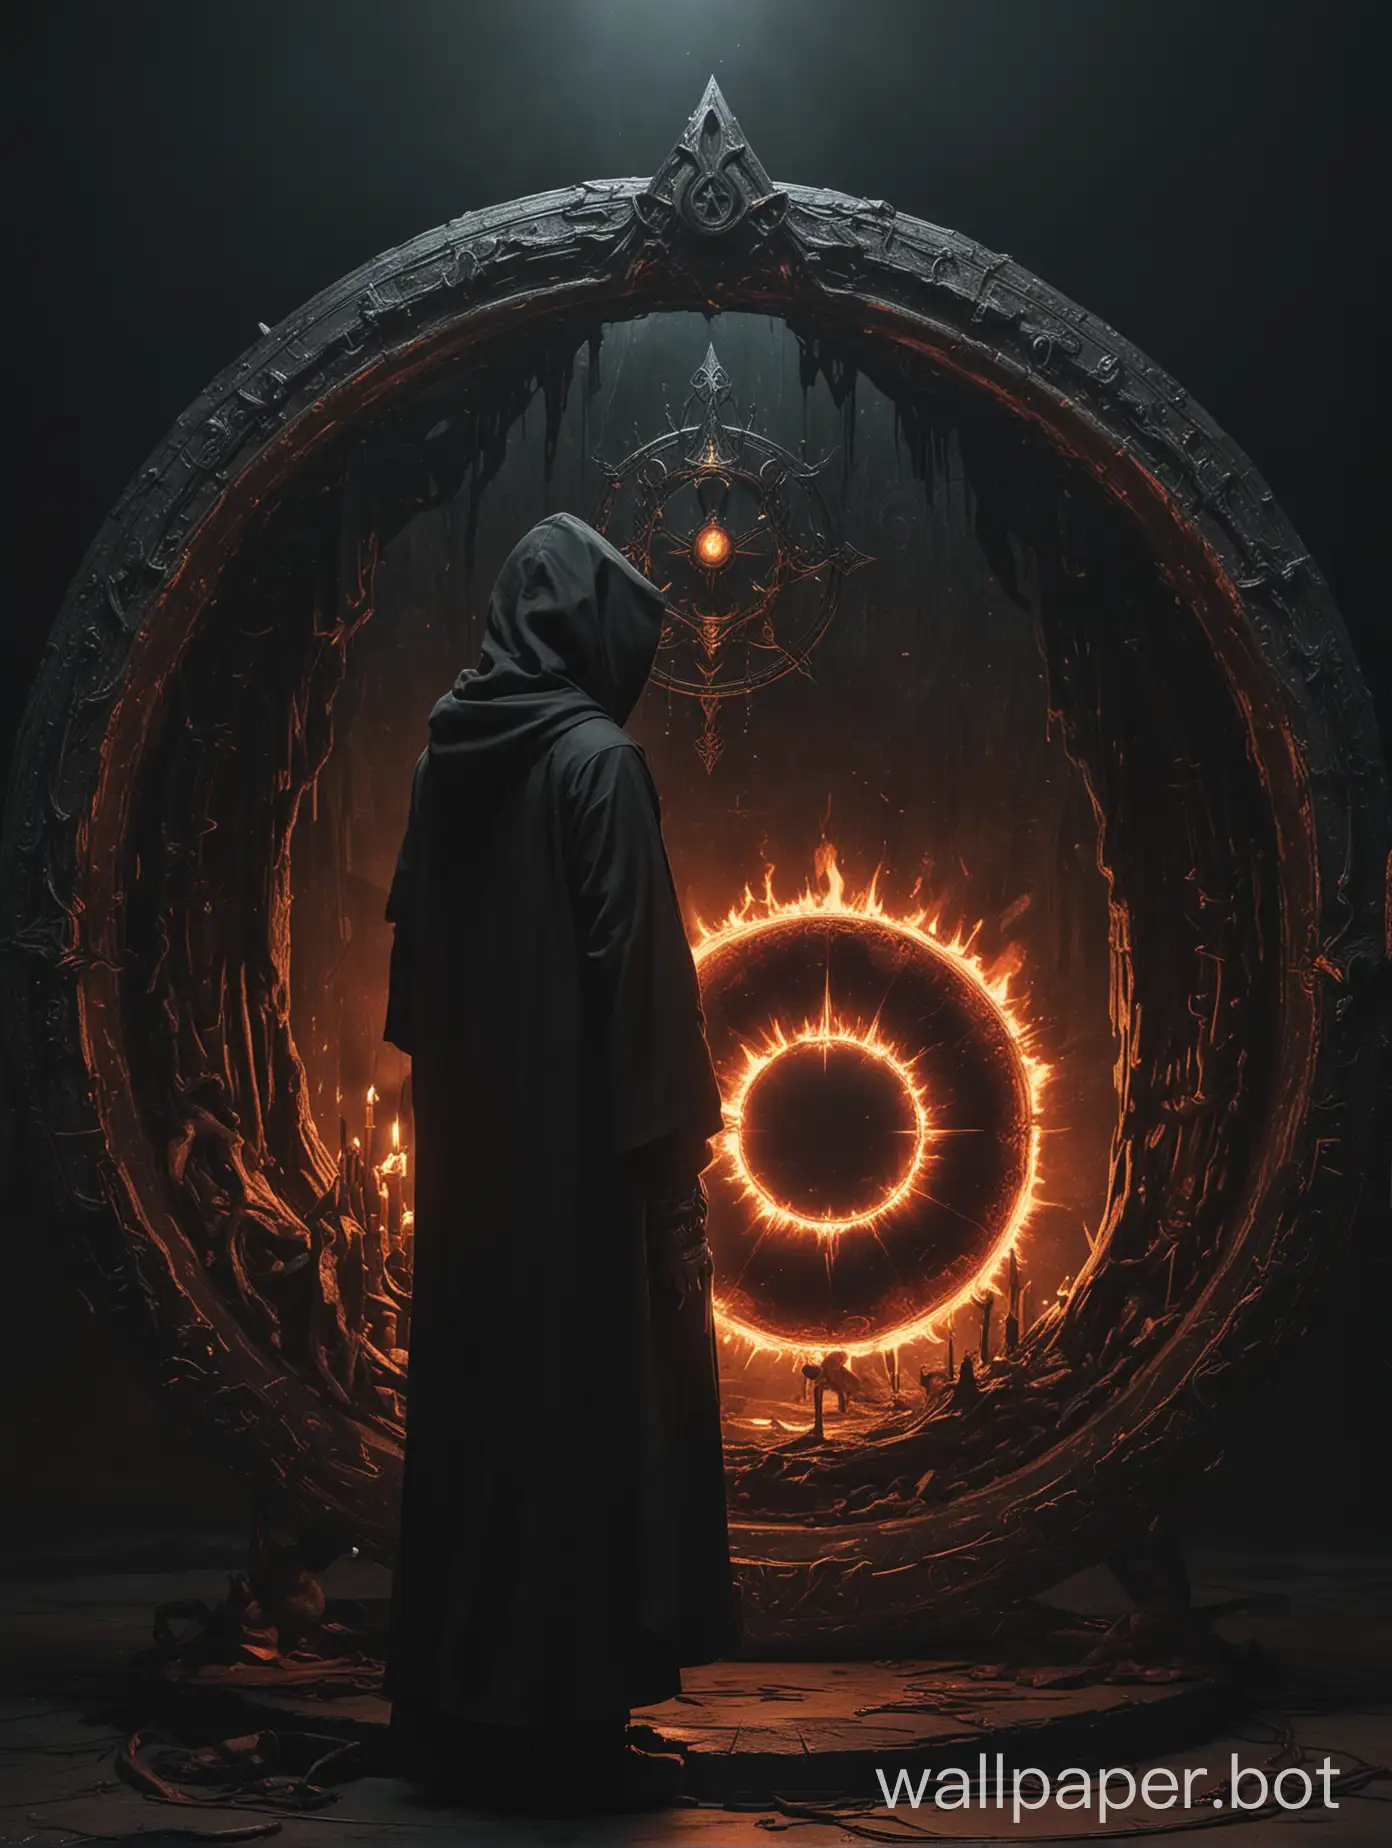 arafed image of a man in a hooded cloak standing in front of a circular object, occultist, just art for dark metal music, cultist, holy flame spell, abstract occult epic composition, diablo digital concept art, album art, god of death, detailed cover artwork, king of time reaper, the allfather, dark soul concept